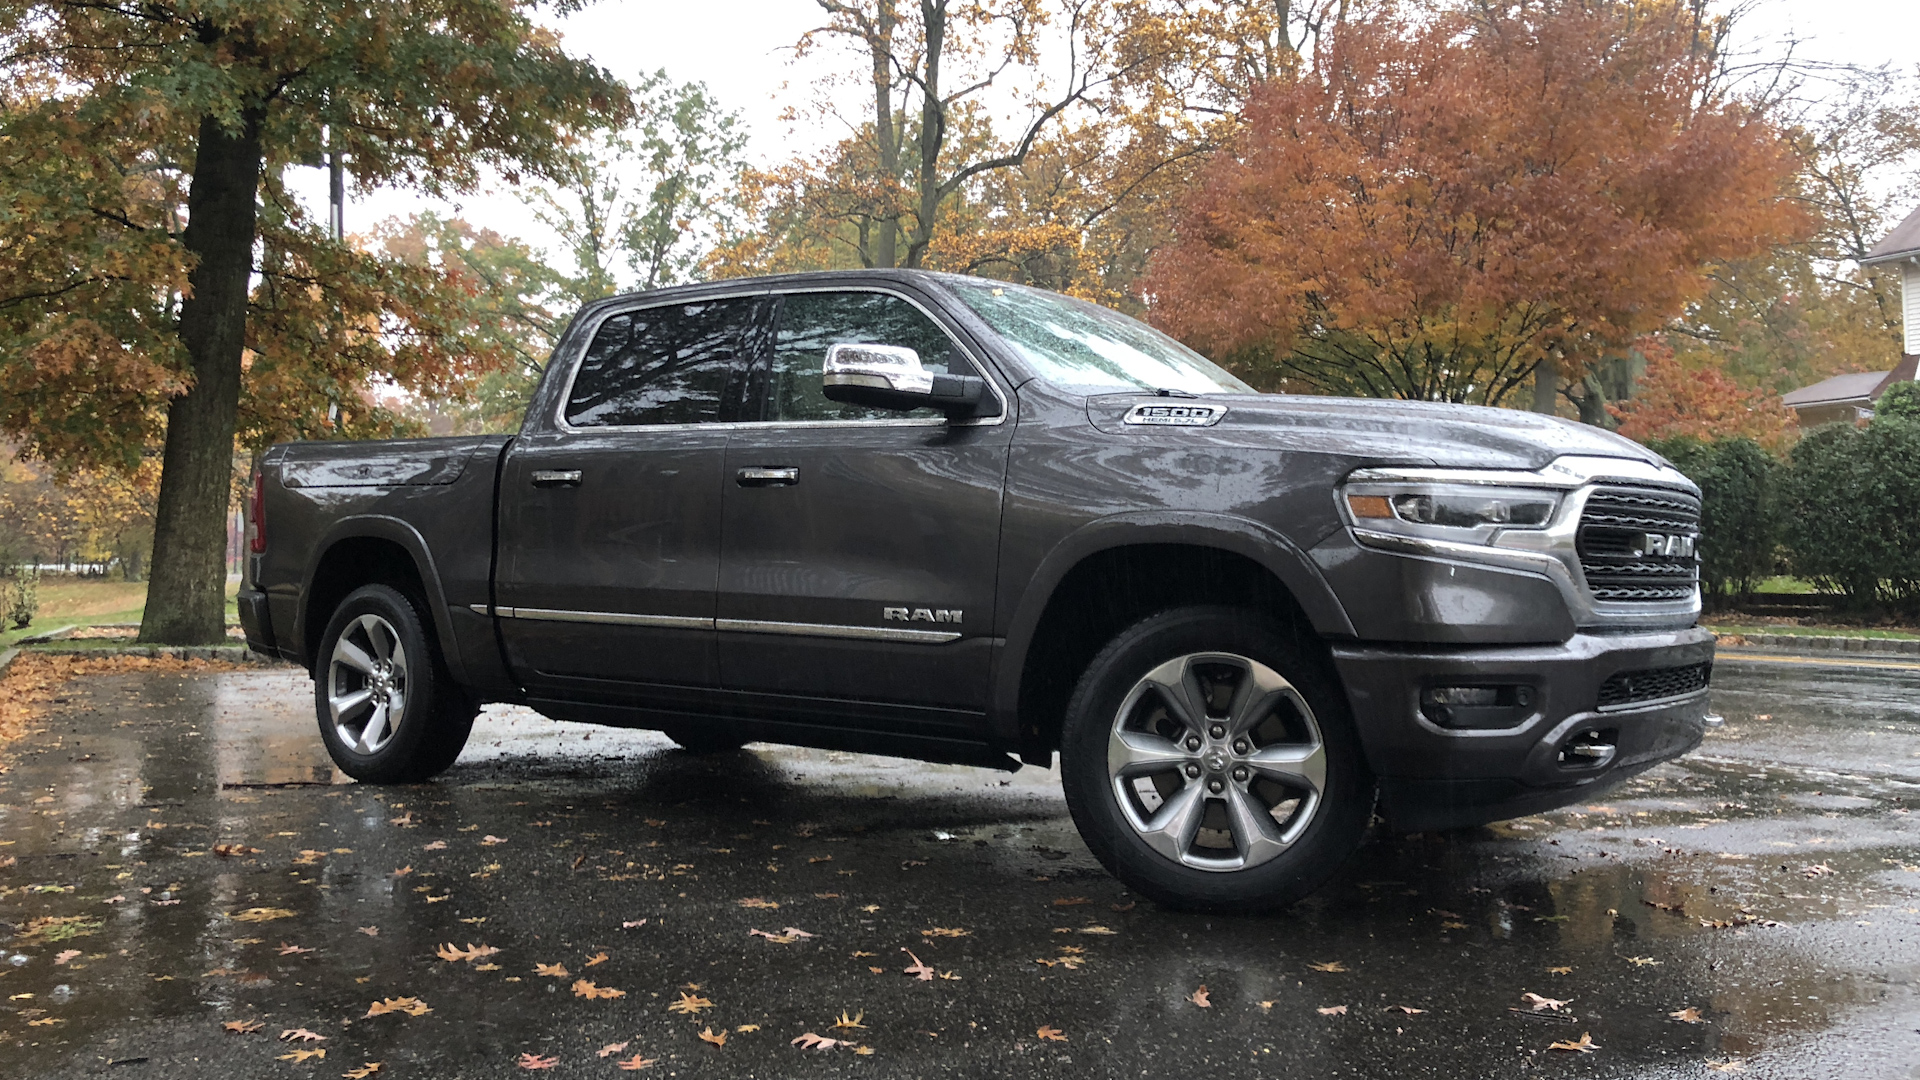 2019 Ram 1500 Limited Crew Cab 4×4 Review: A Noble Steed With the Fanciest of Trimmings